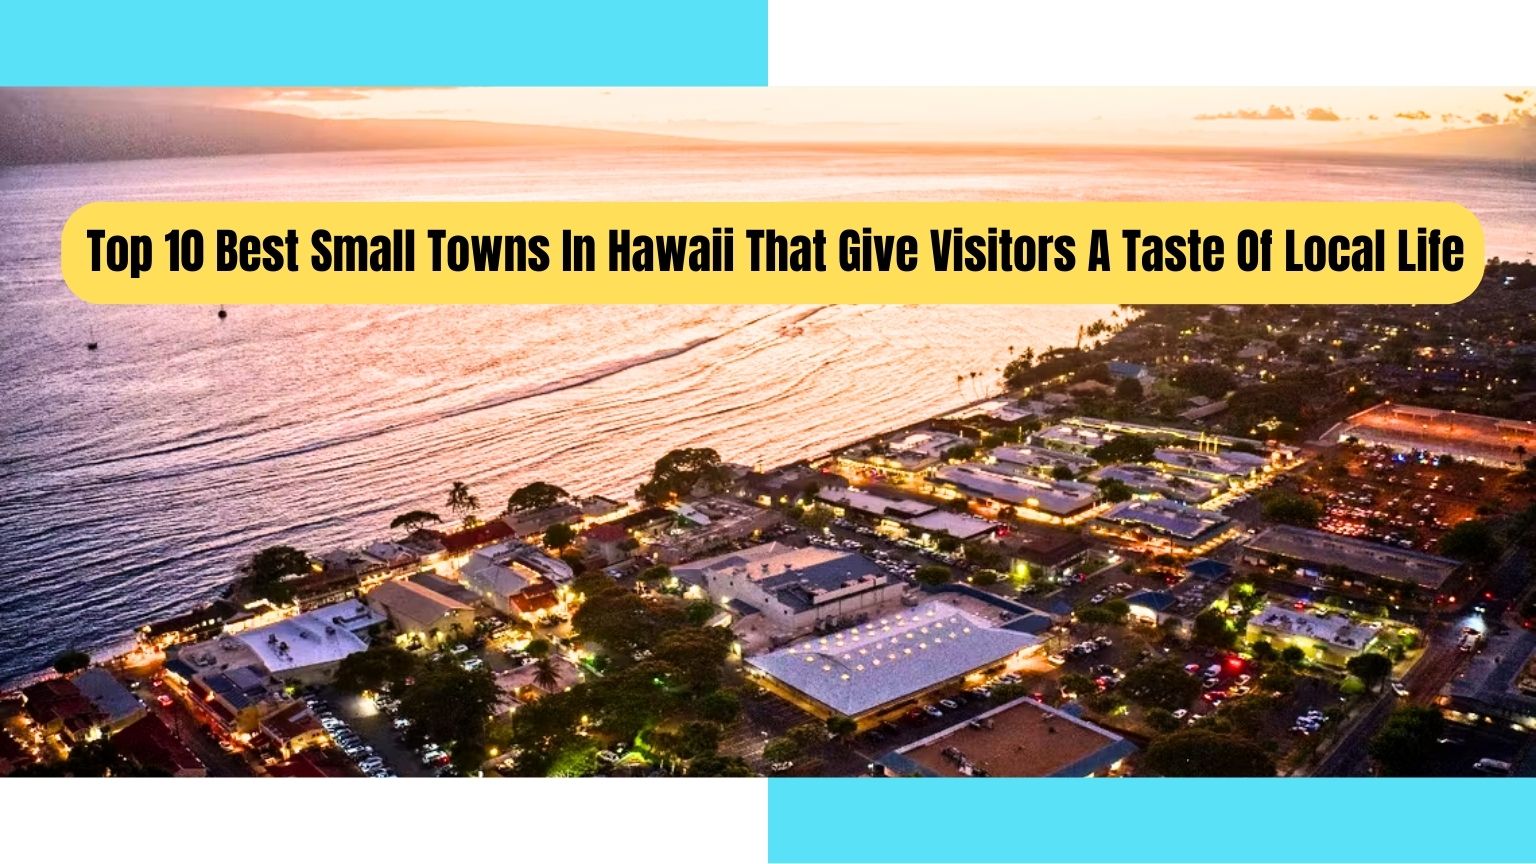 Top 10 Best Small Towns In Hawaii That Give Visitors A Taste Of Local Life, Best Small Towns In Hawaii That Give Visitors A Taste Of Local Life, Small Towns In Hawaii, Best Small Towns In Hawaii